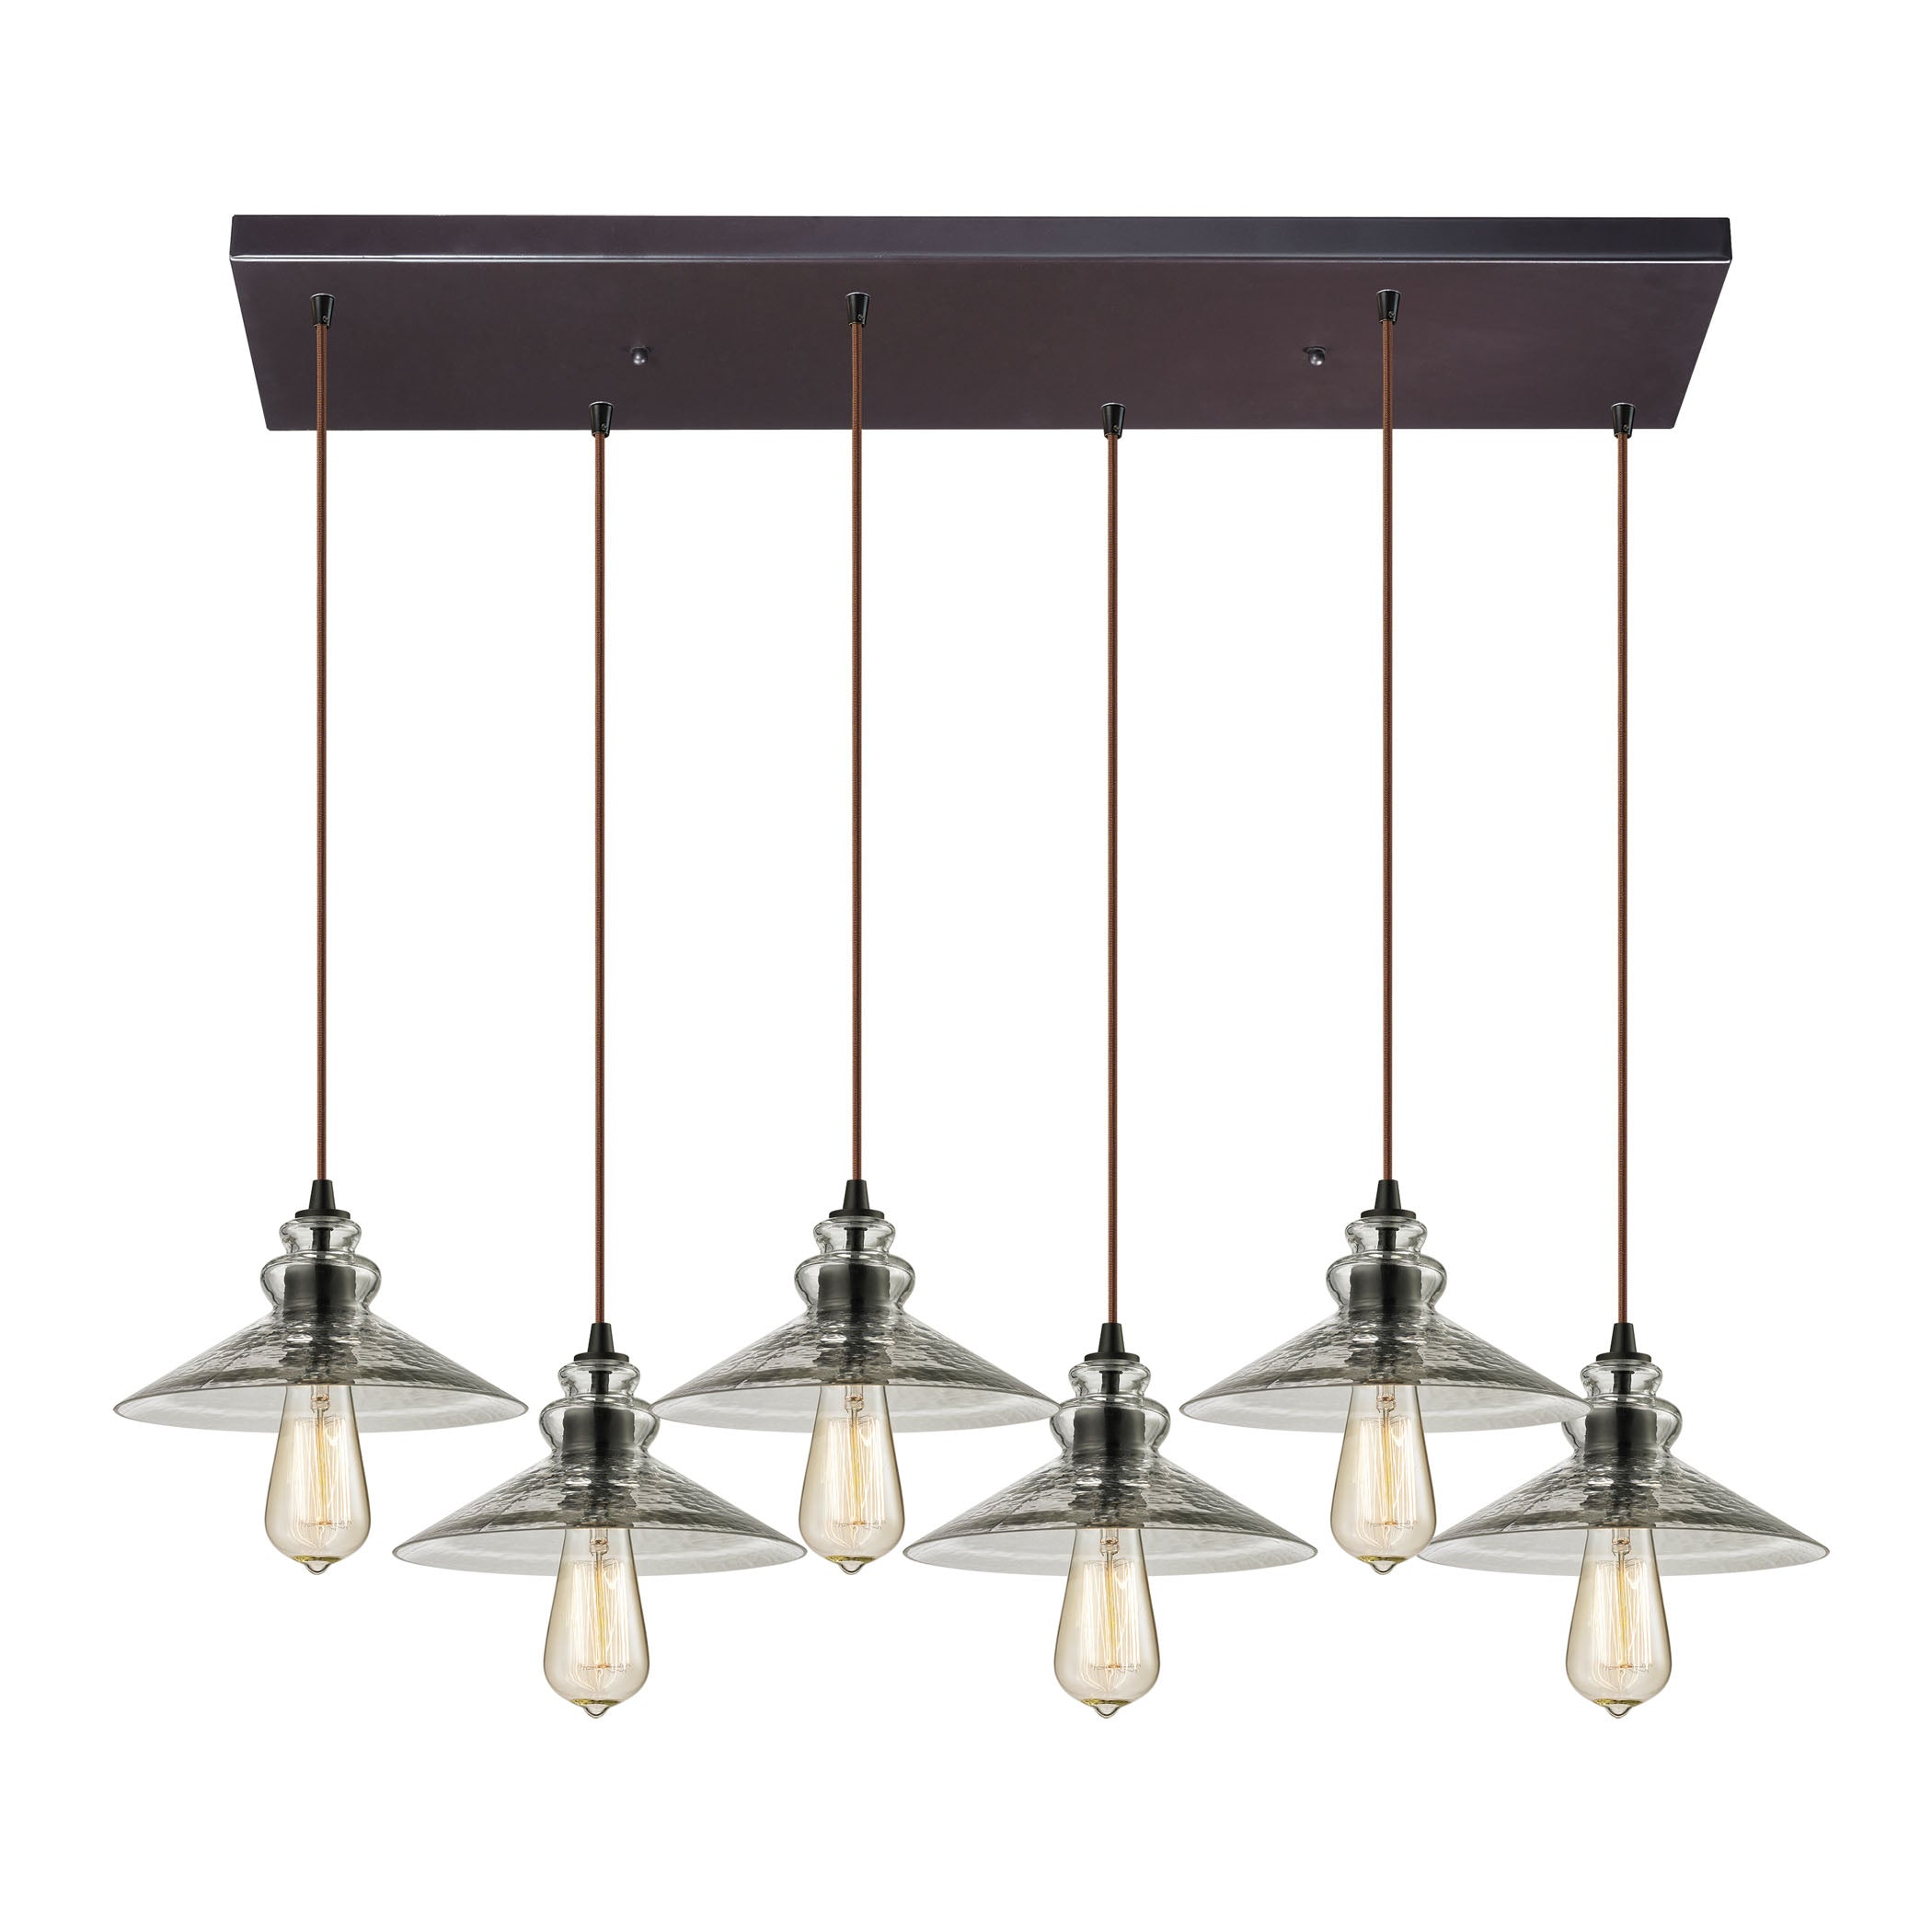 ELK Lighting 10332/6RC Hammered Glass 6-Light Rectangular Pendant Fixture in Oiled Bronze with Hammered Clear Glass